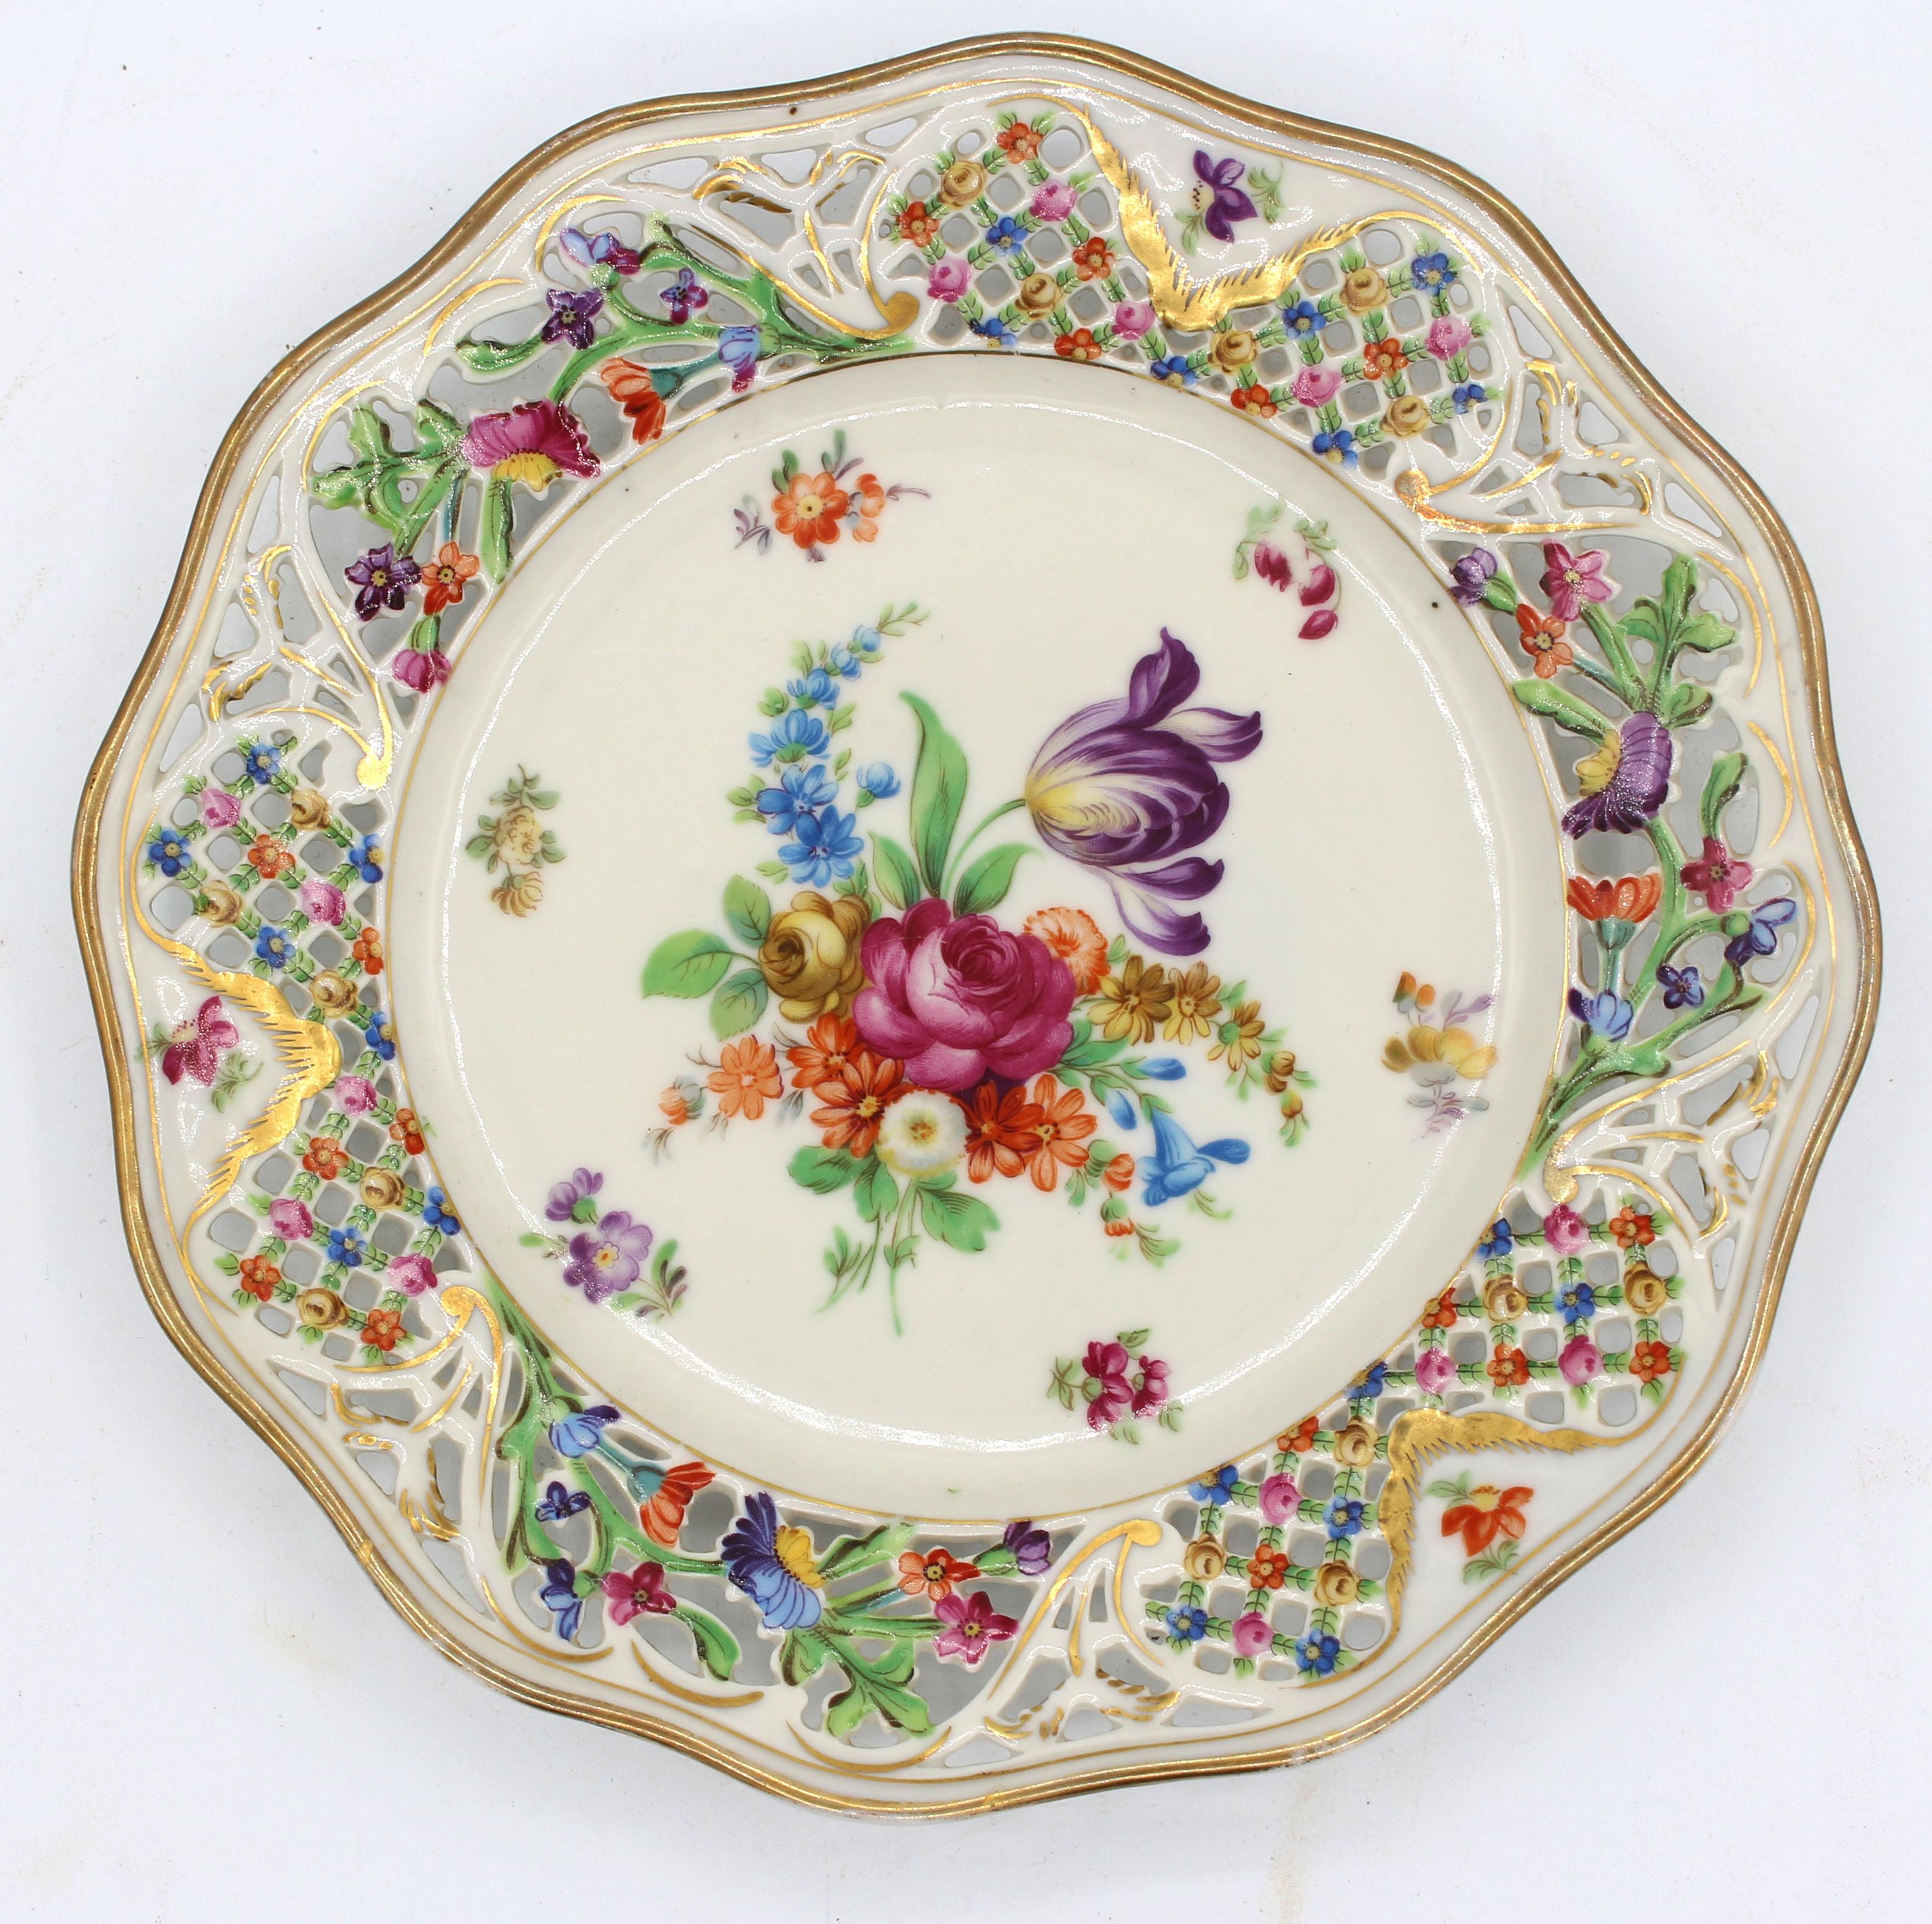 Rococo 1932-1944 Set of 8 Dessert Plates by Schumann, Dresden & Bavaria periods For Sale